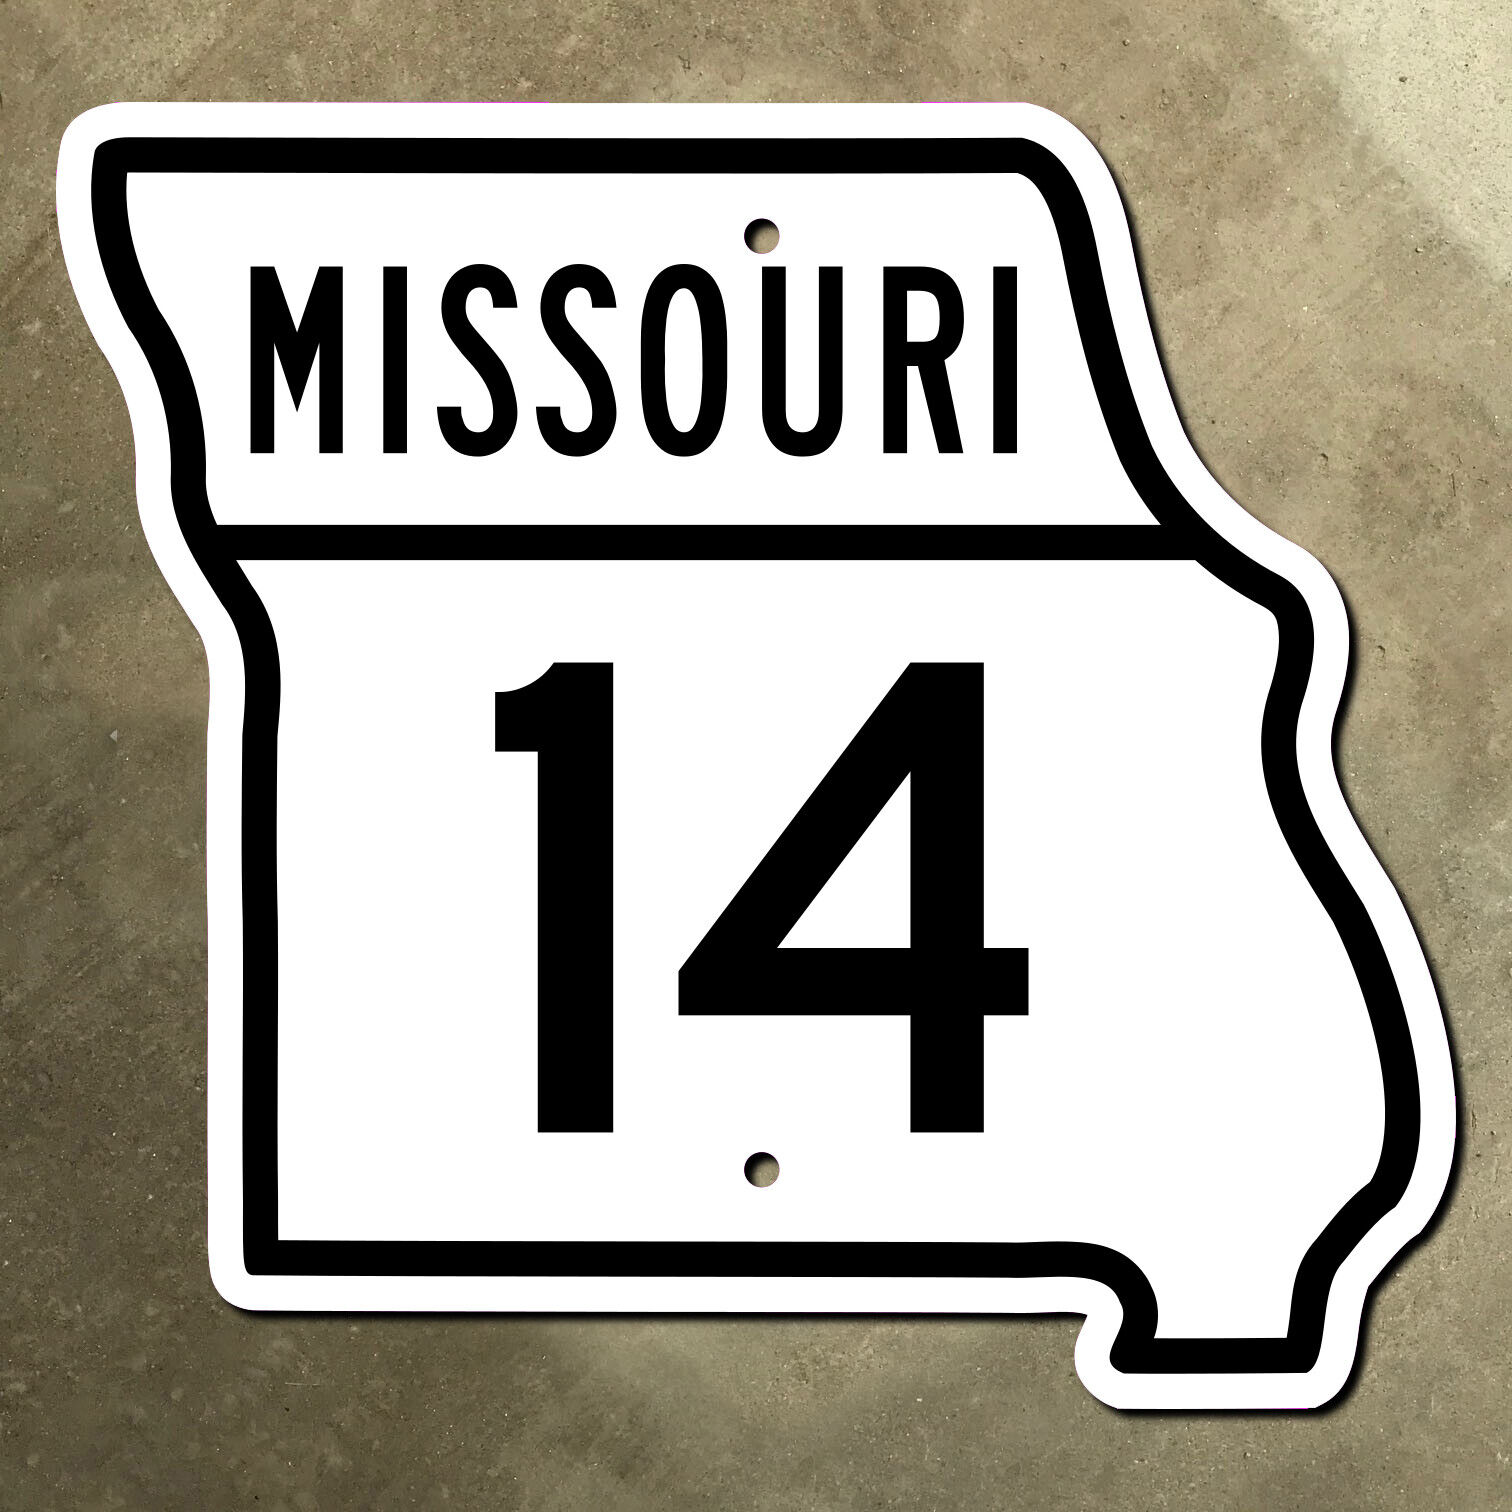 Missouri state route 14 highway marker road sign 1963 Ozark 15x14